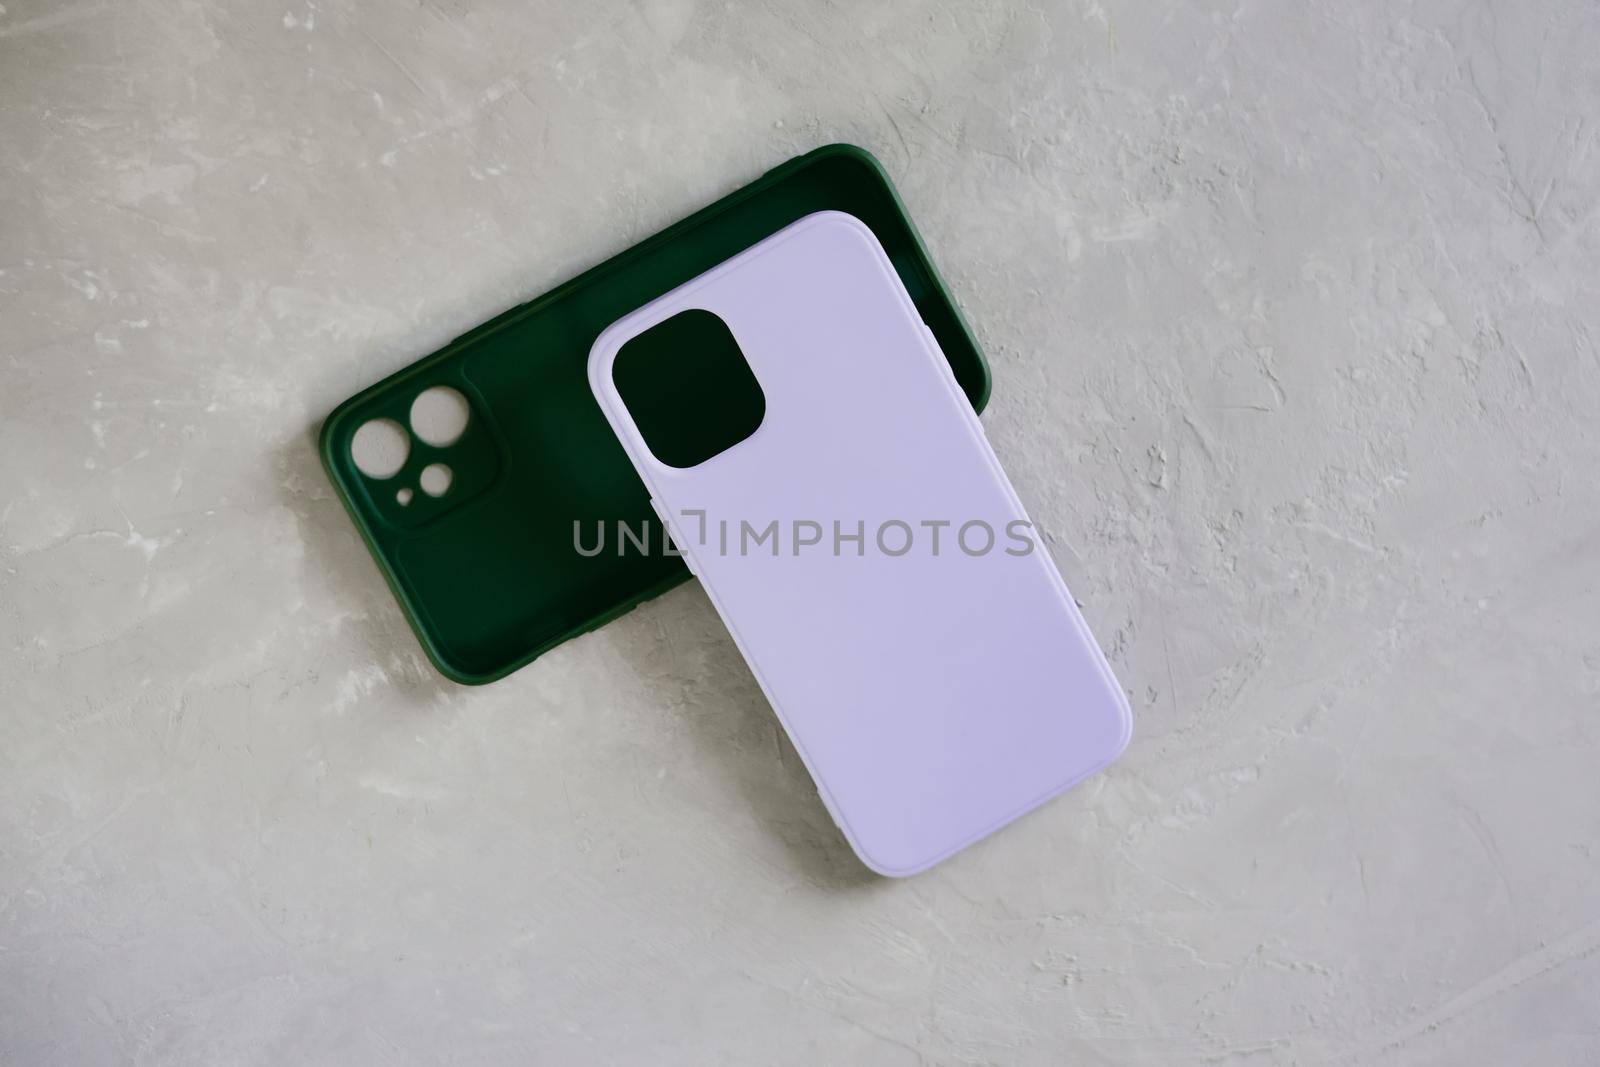 Purple and green smartphone cases. Two silicone cases on a textured gray background.